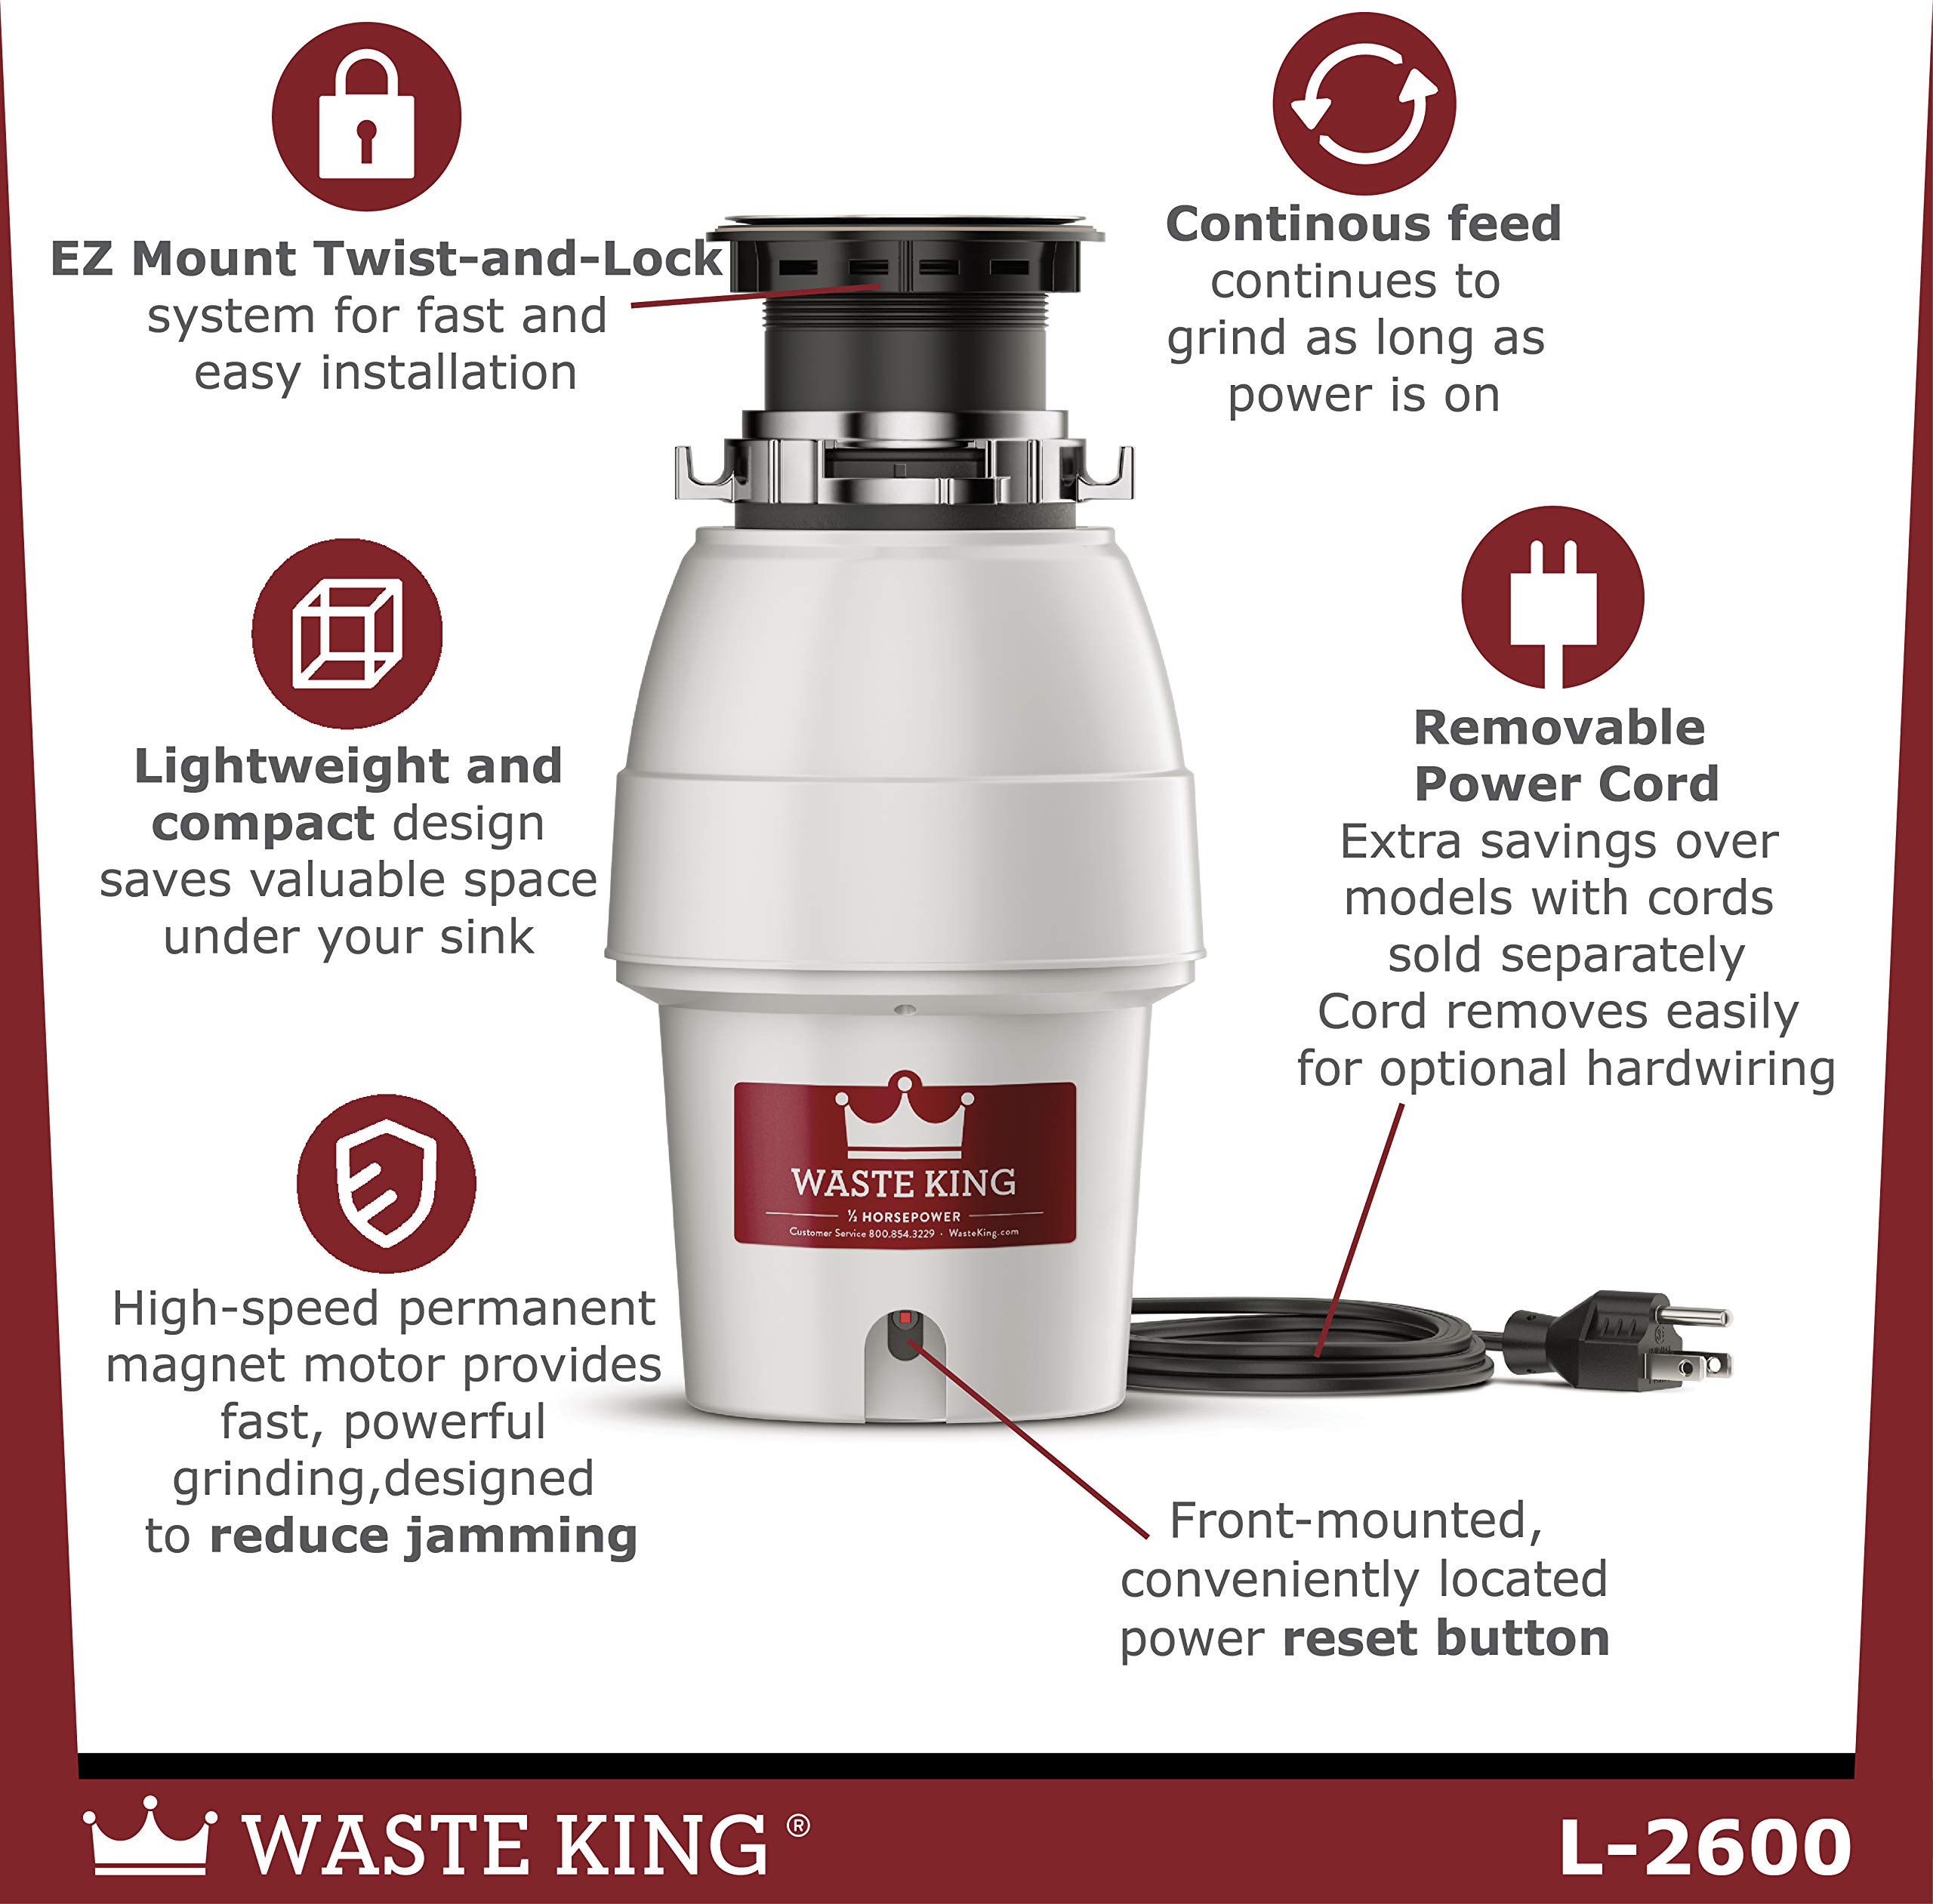 Waste King L-2600 Legend Series 1/2 HP Continuous Feed Garbage Disposal with Power Cord, Waste Disposer for Kitchen Sink